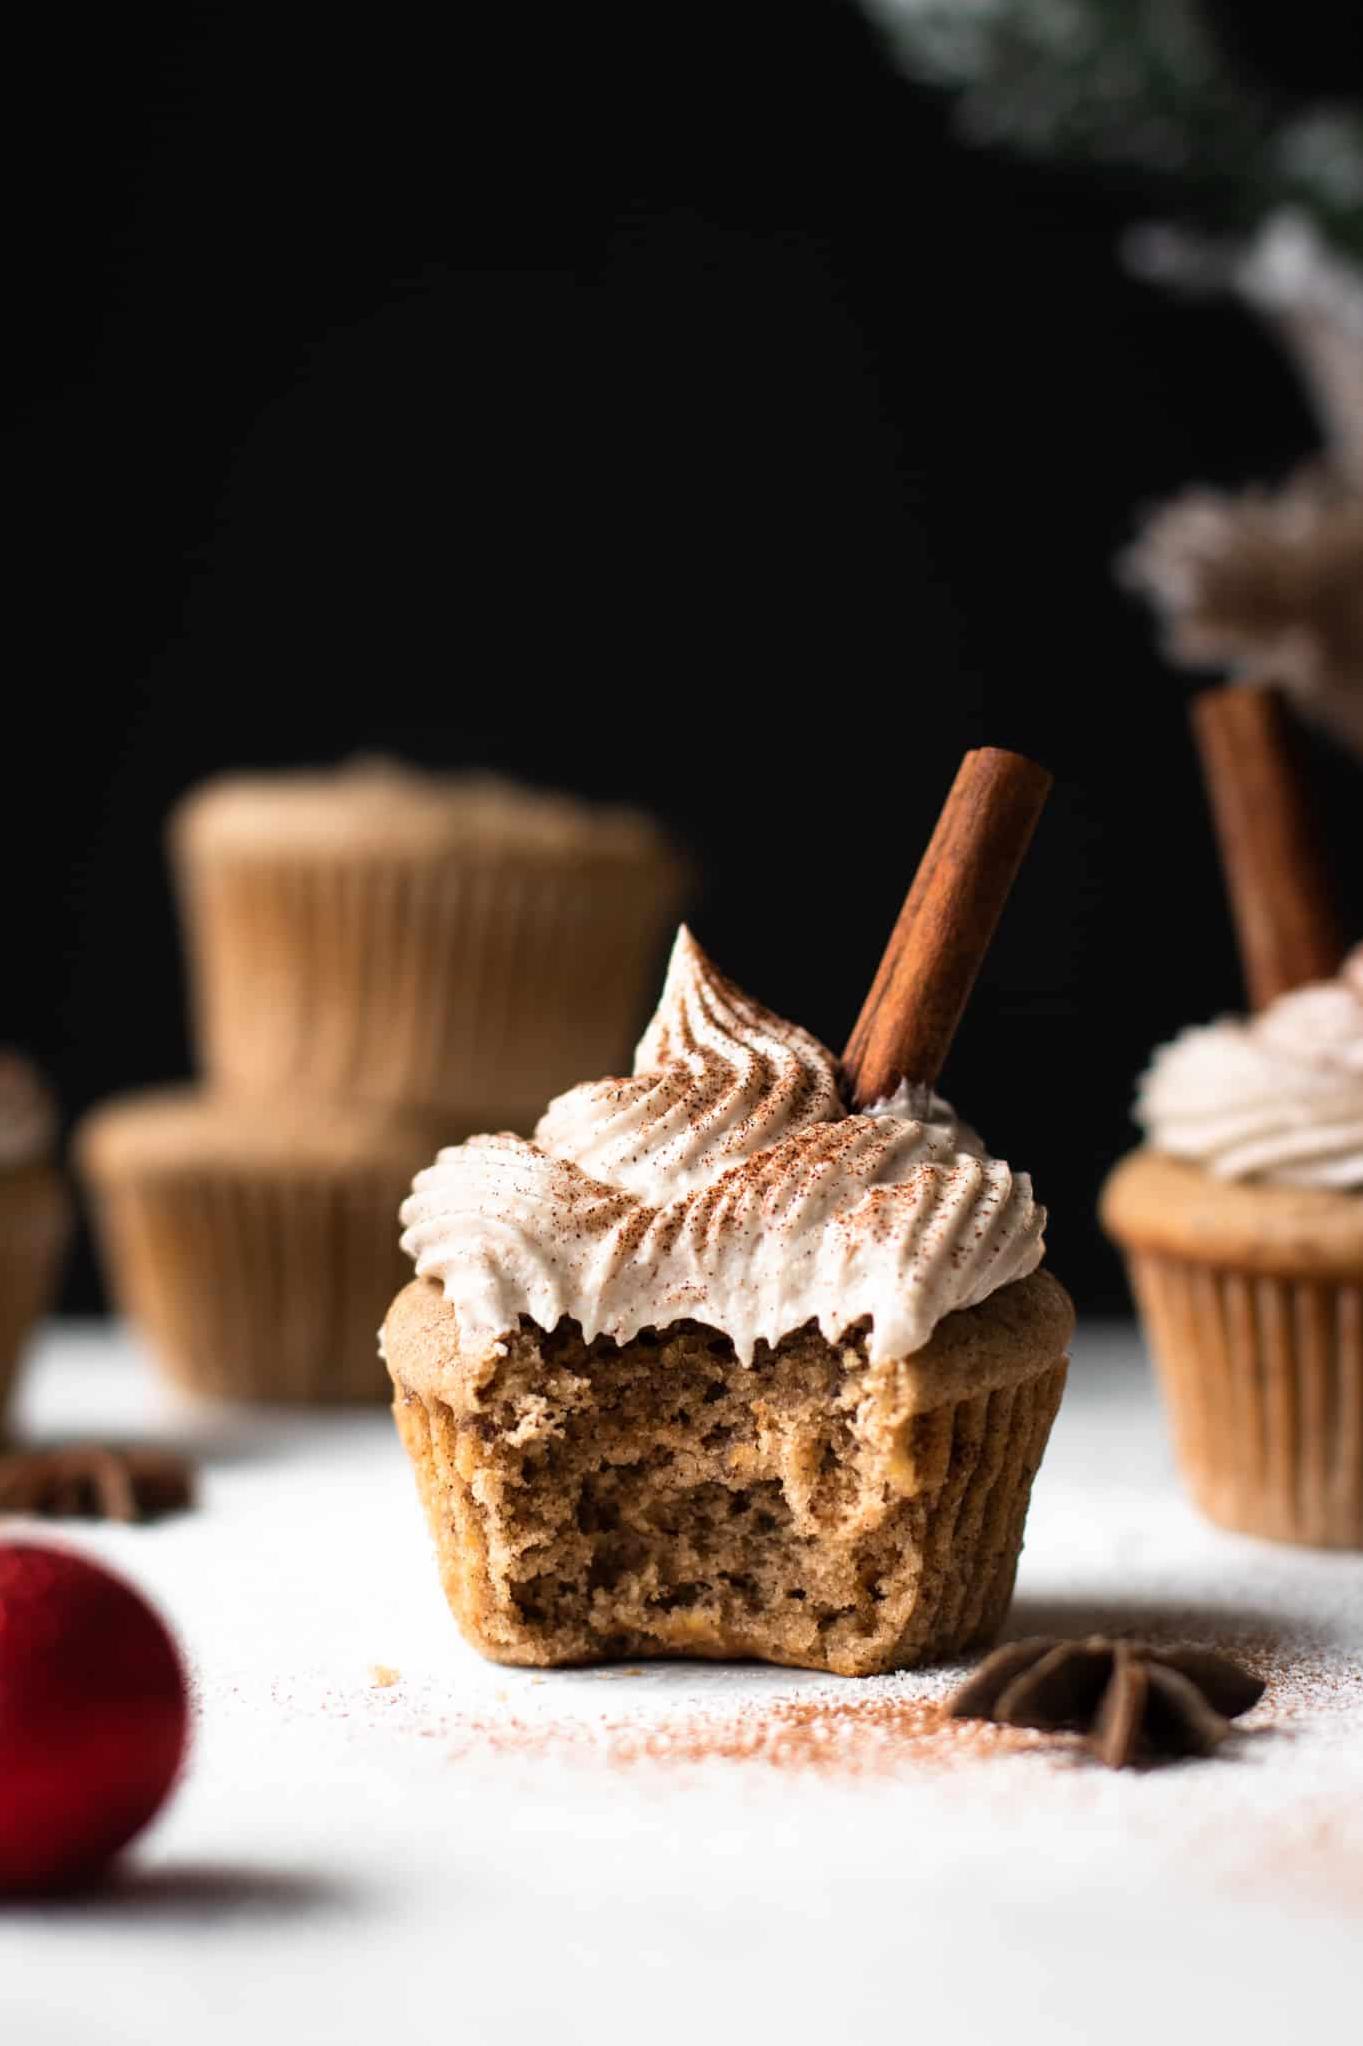  These cupcakes may be vegan, but they're just as tasty as any other cupcake out there.